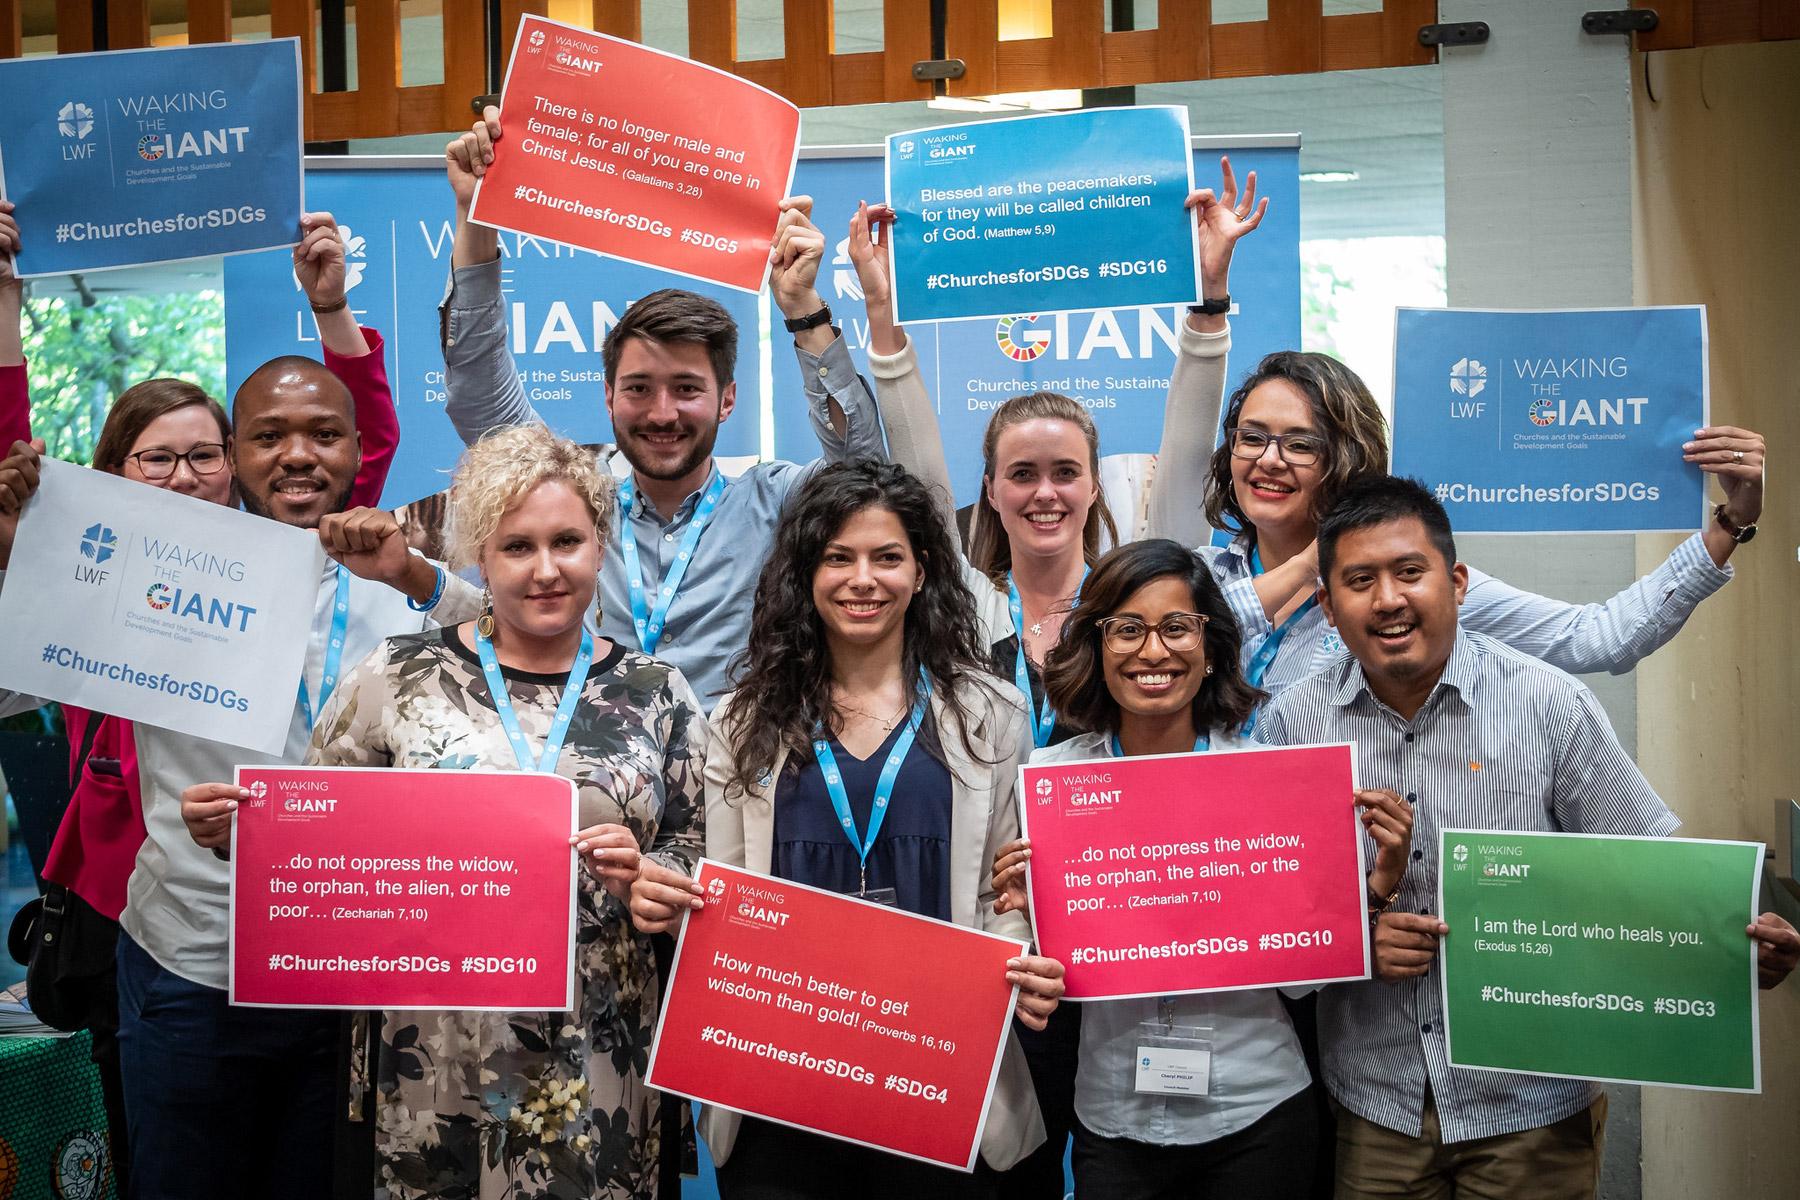 LWF Council members take part in a June 2019 event in Geneva to publicize the work of Waking the Giant. Photo: LWF/S.Gallay